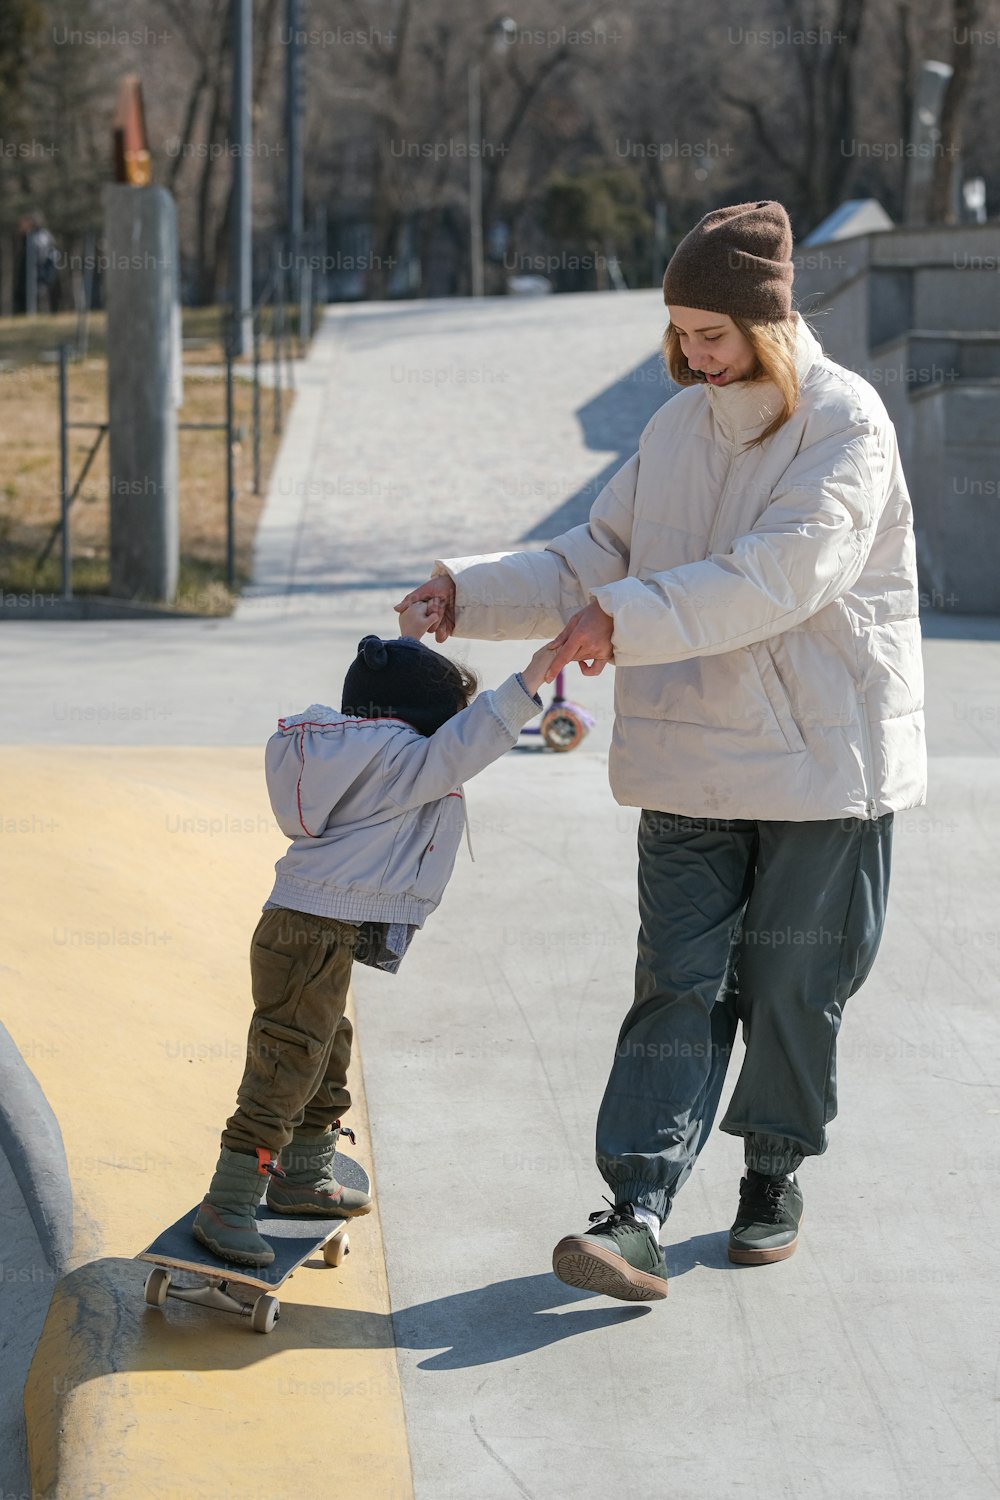 a woman teaching a child how to ride a skateboard